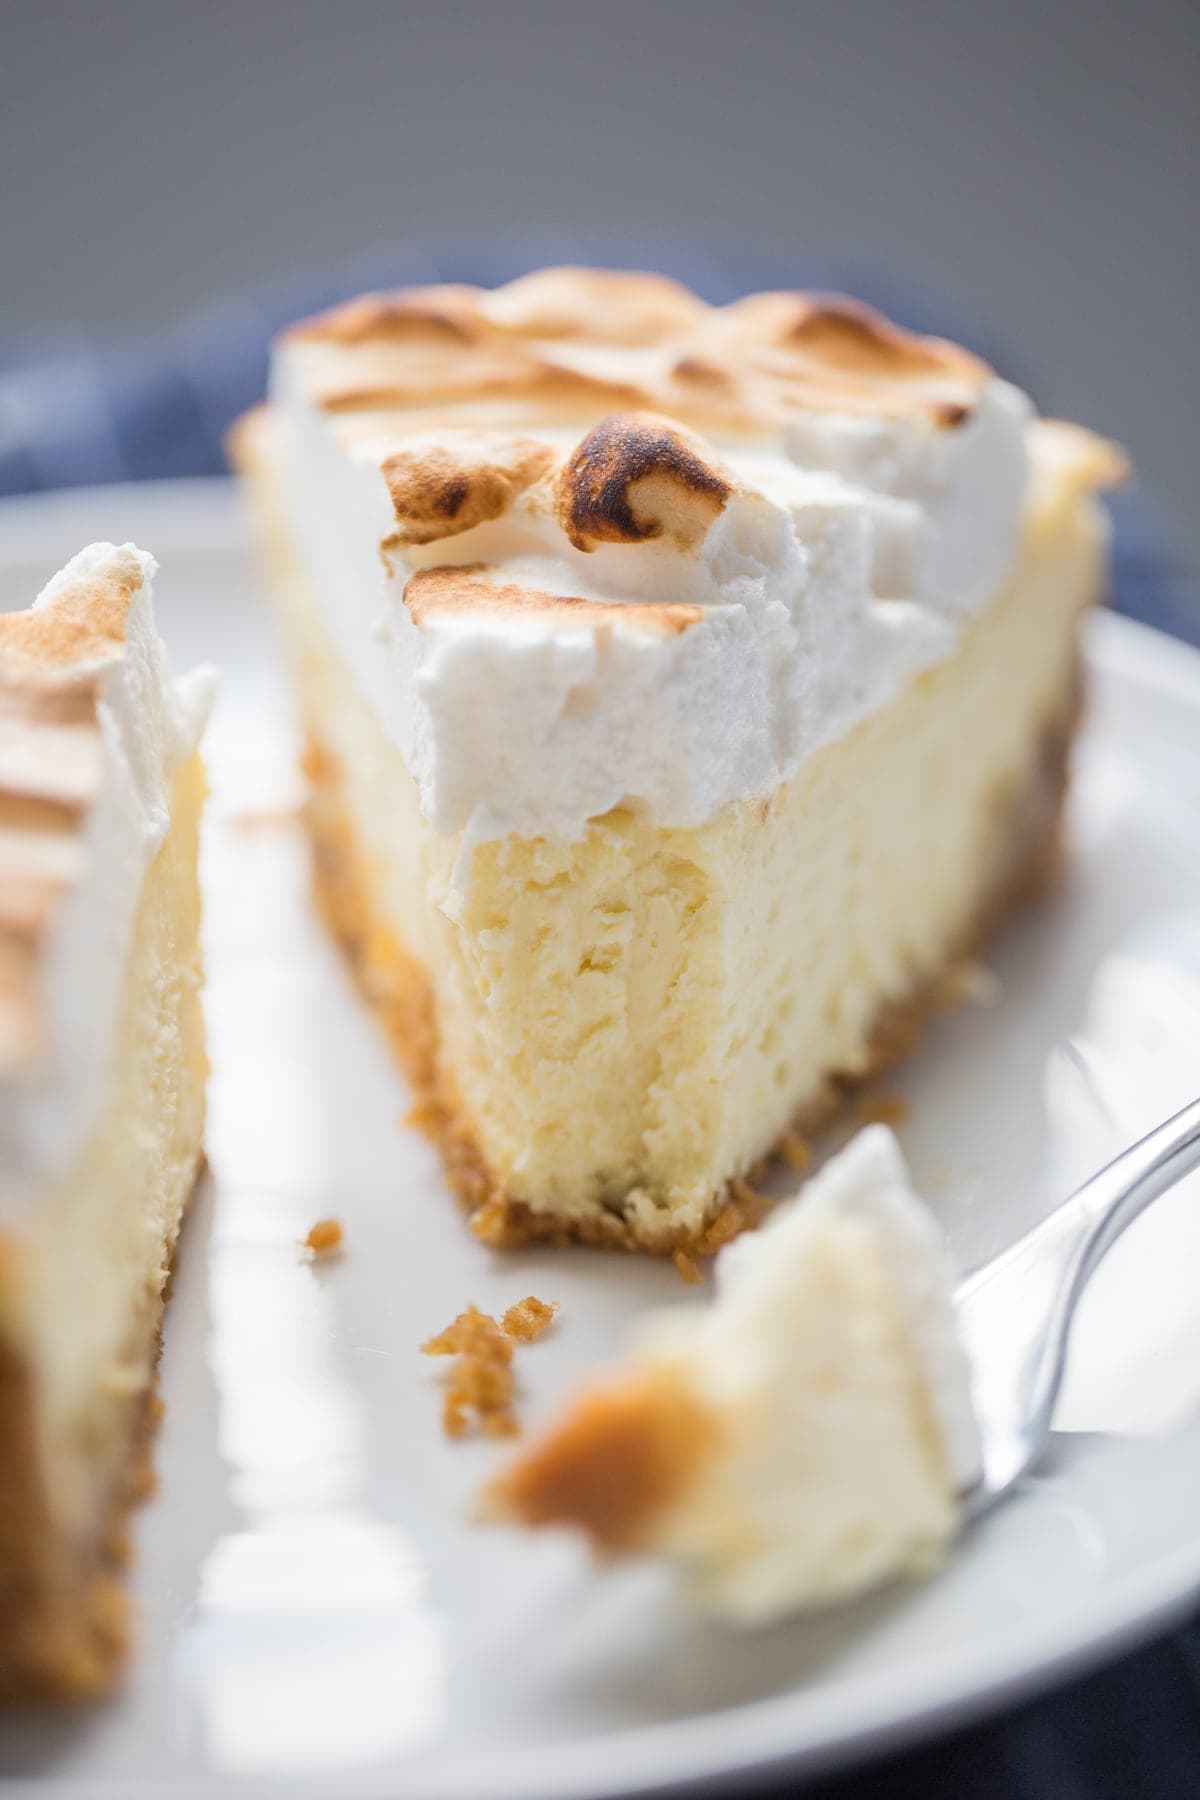 slice of lemon meringue cheesecake with a bite taken out of it